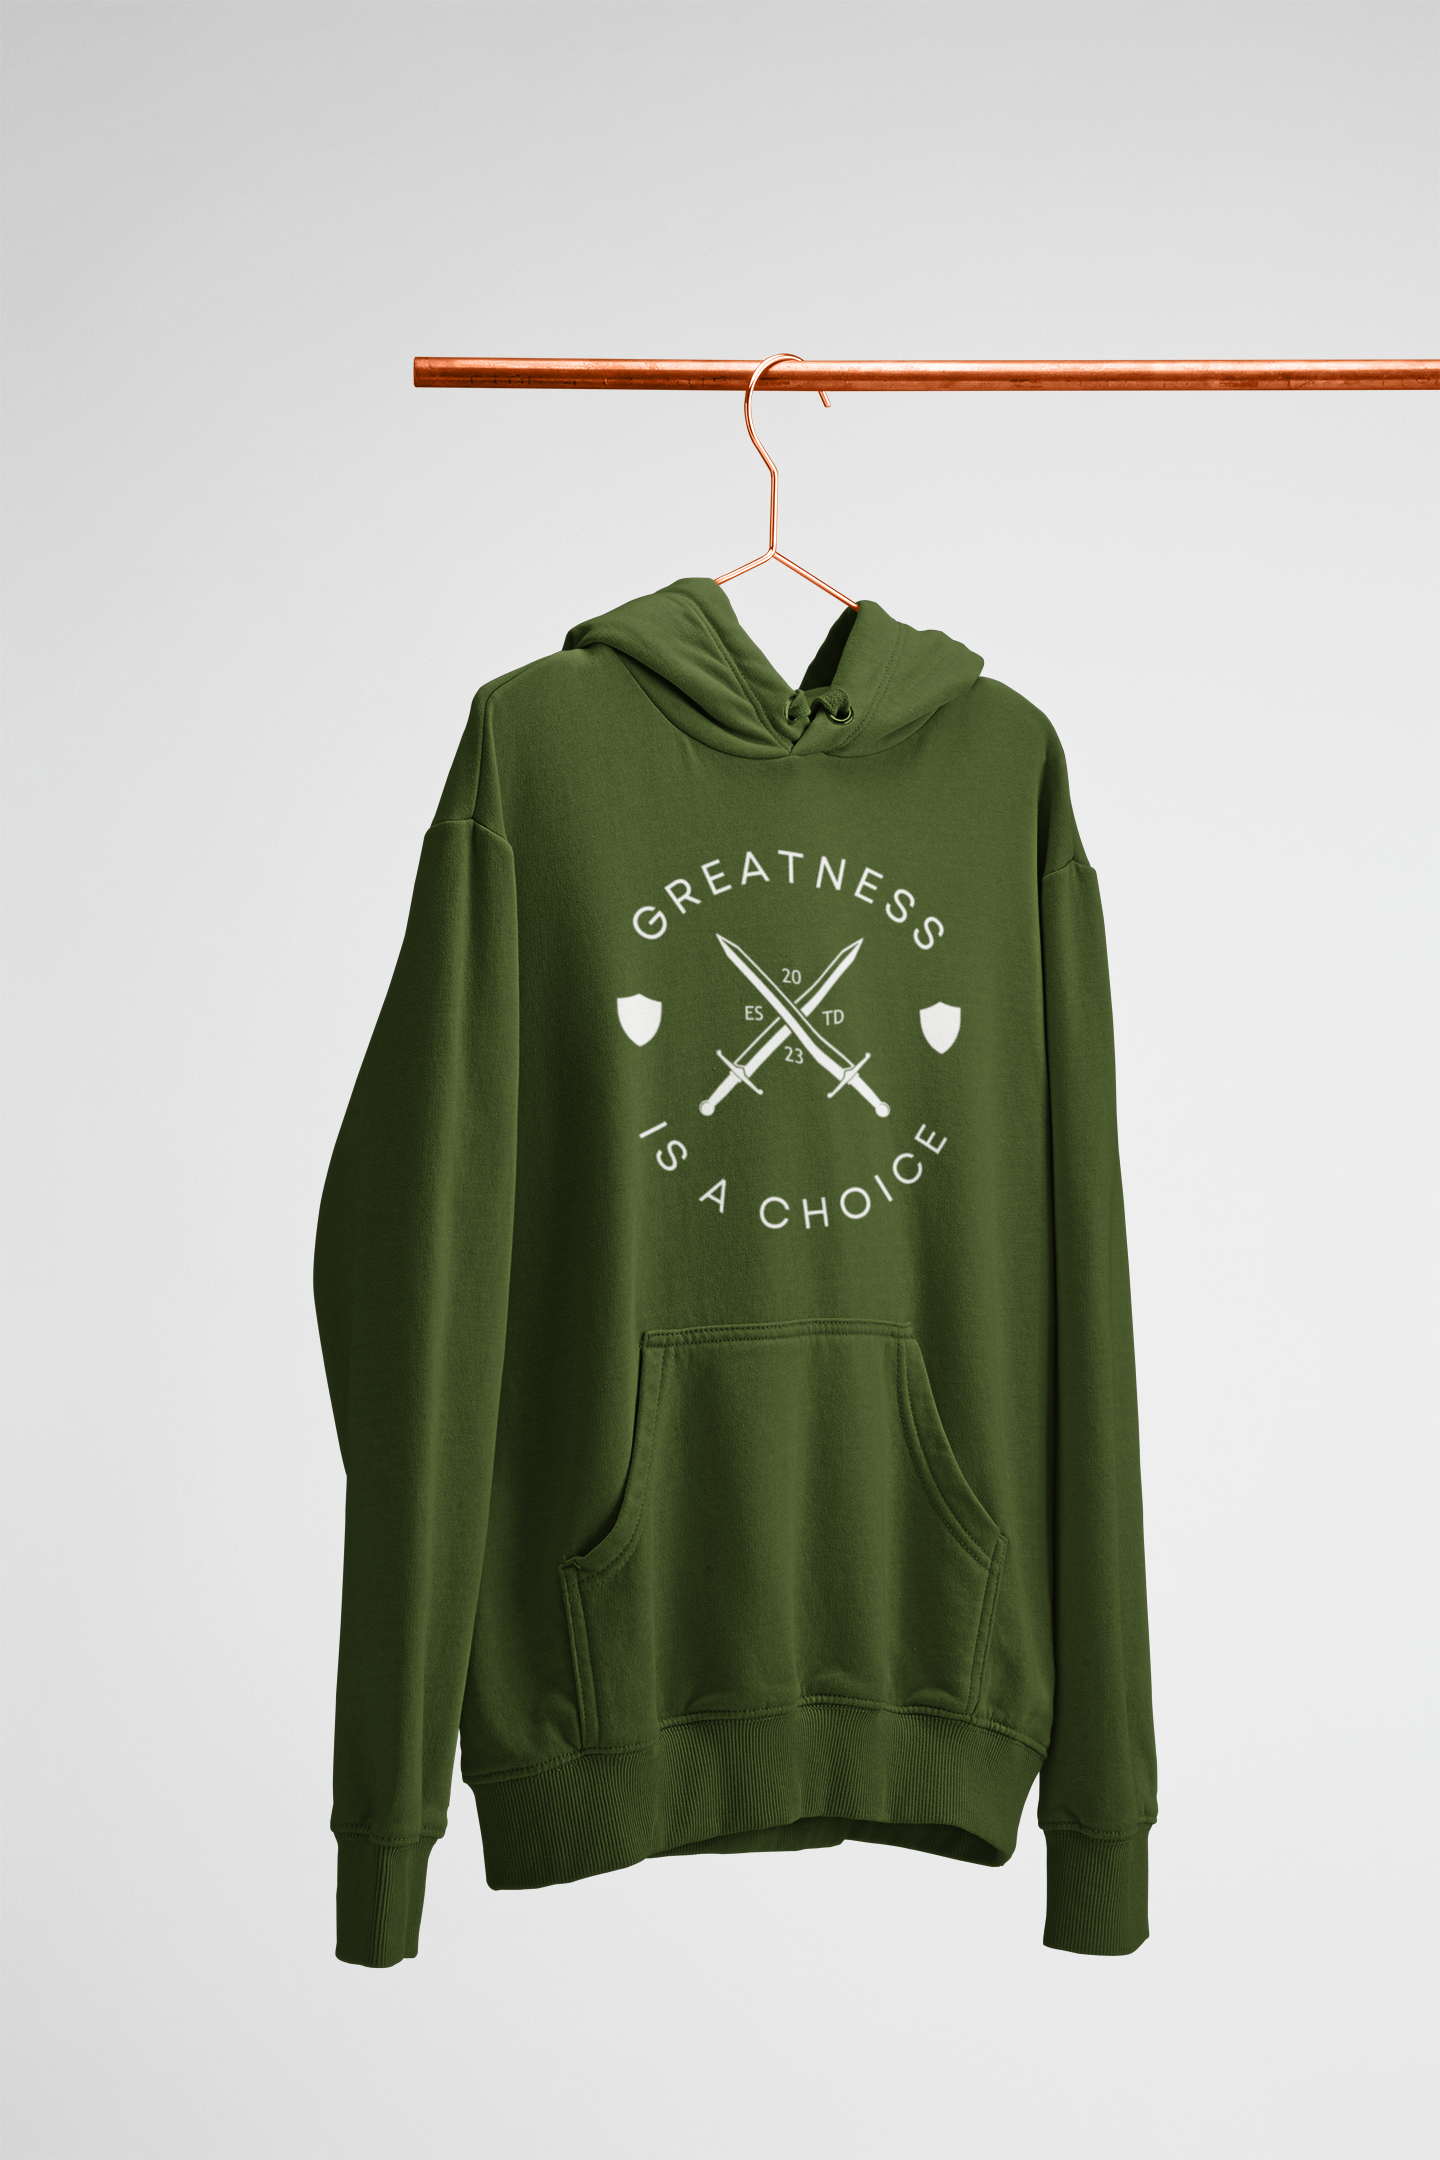 'Greatness is a Choice' Hoodie